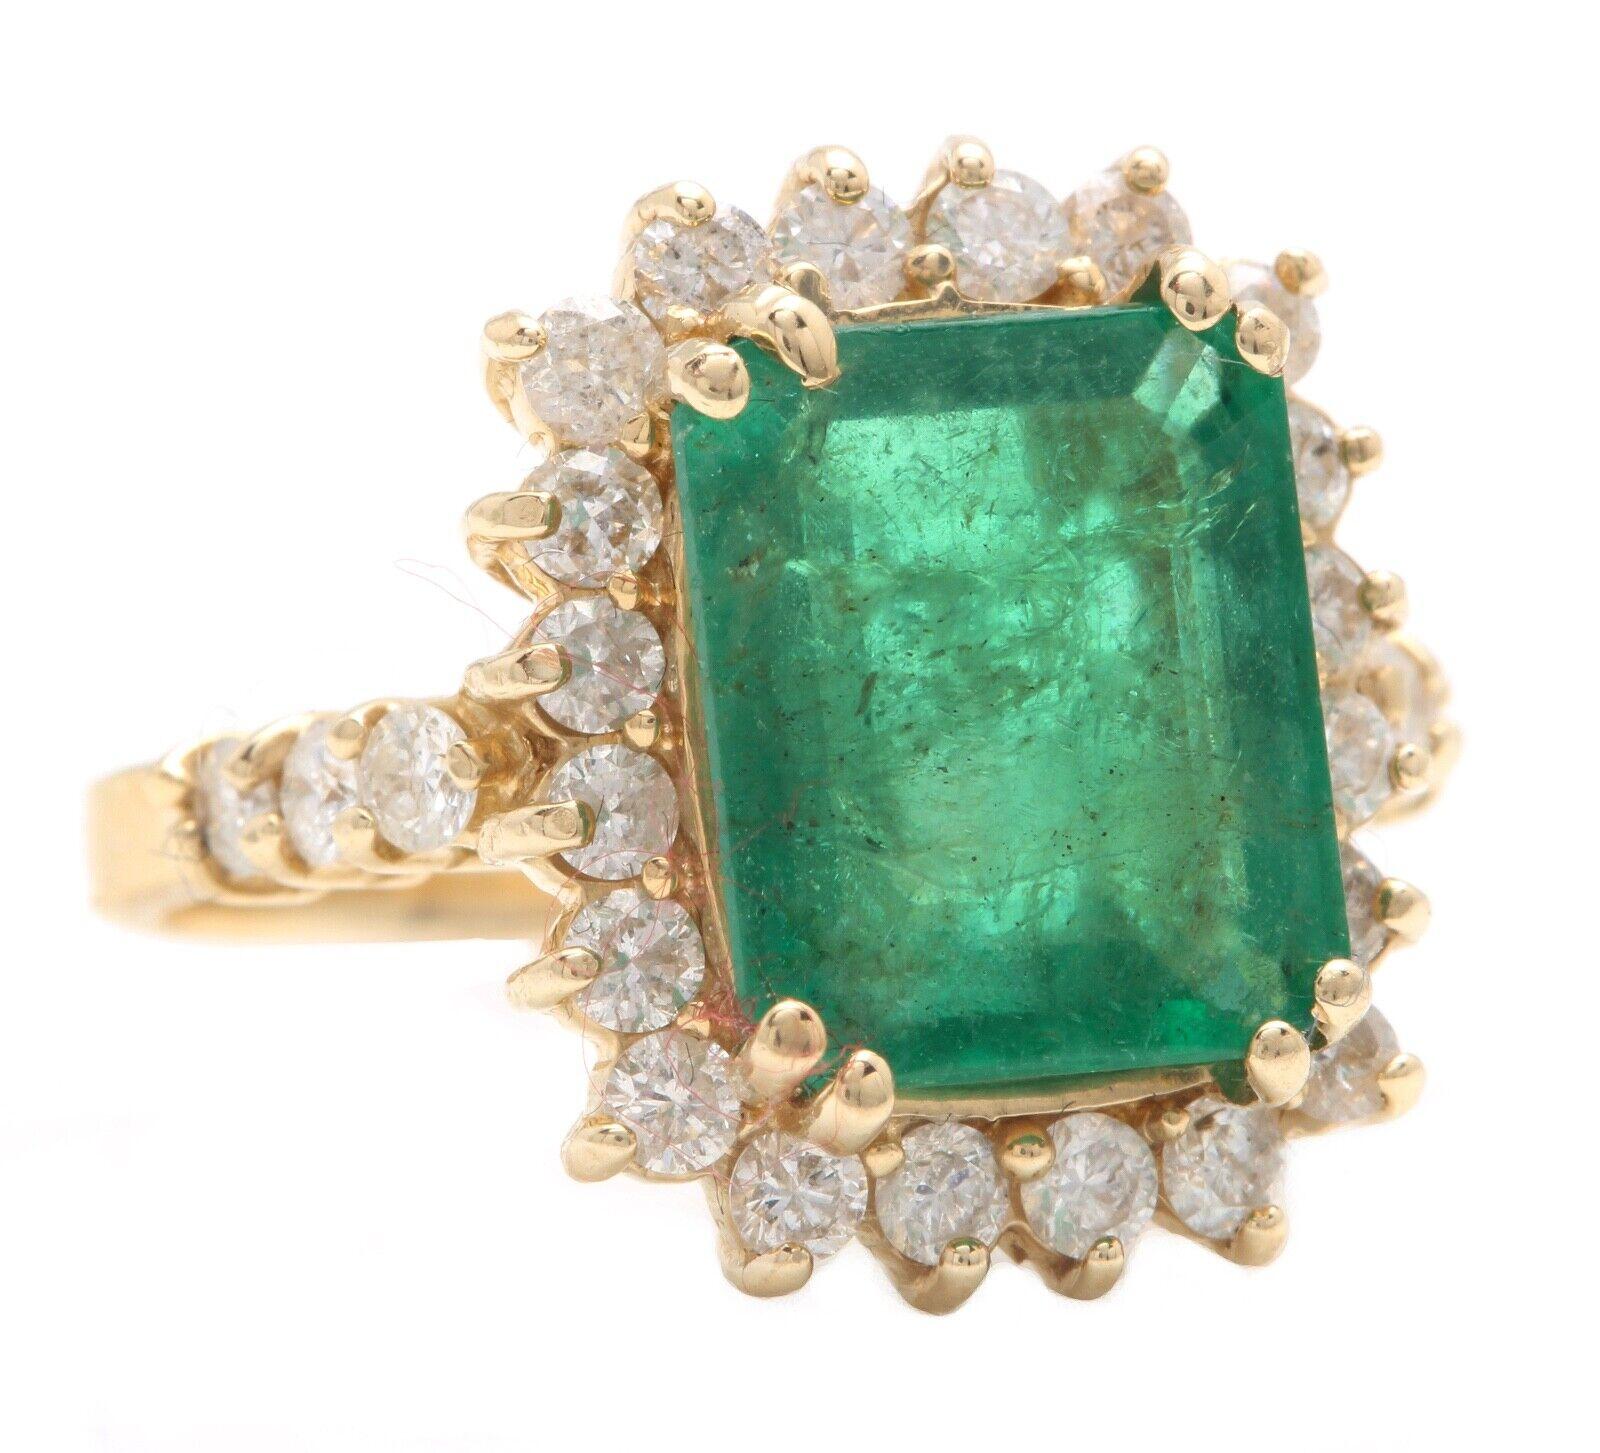 4.90 Carats Natural Emerald and Diamond 14K Solid Yellow Gold Ring

Suggested Replacement Value: $8,000.00

Total Natural Green Emerald Weight is: Approx. 4.00 Carats (transparent) 

Emerald Measures: Approx. 11.10 x 9.30mm

Natural Round Diamonds